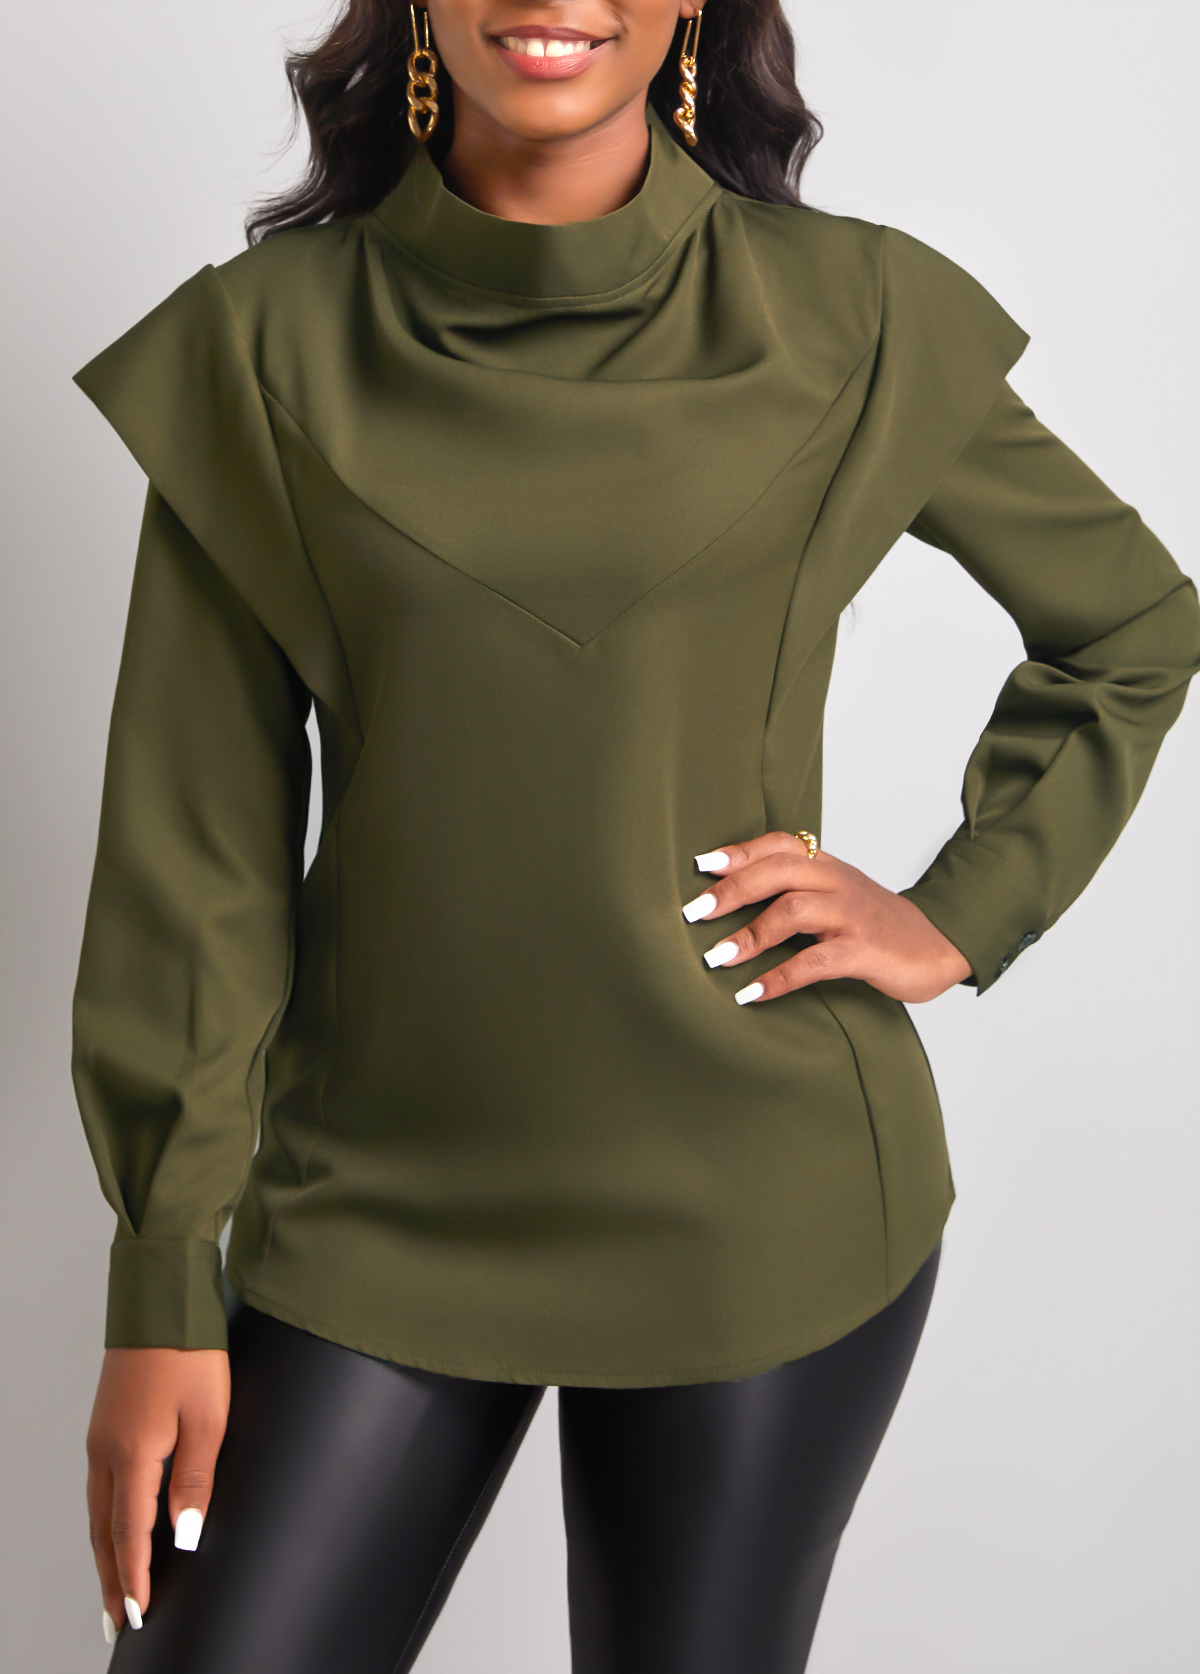 High Neck Olive Green Long Sleeve Blouse